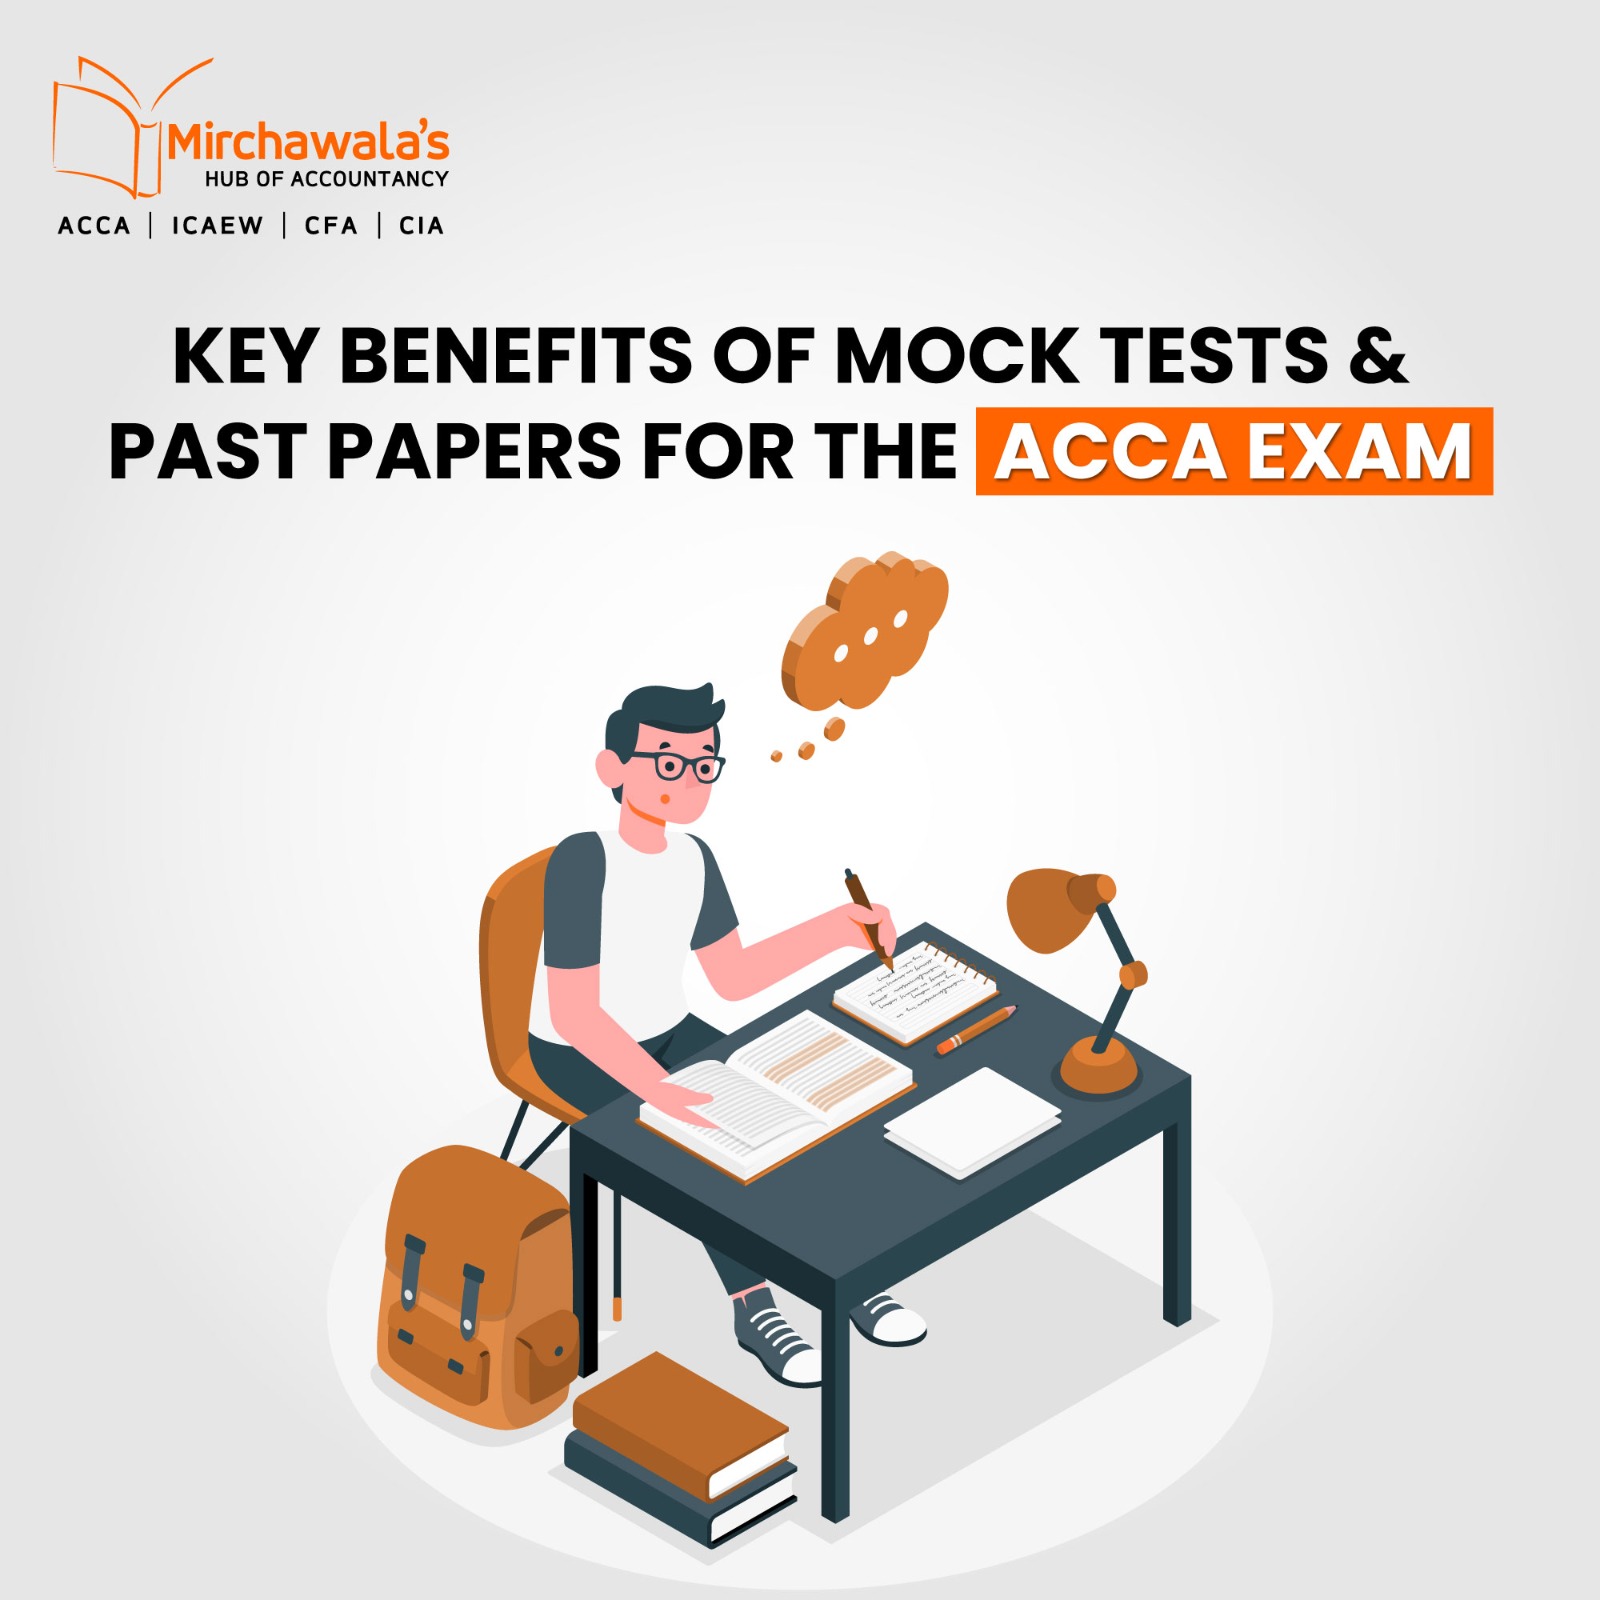 Key Benefits of Mock Tests and Past Papers for the ACCA Exam